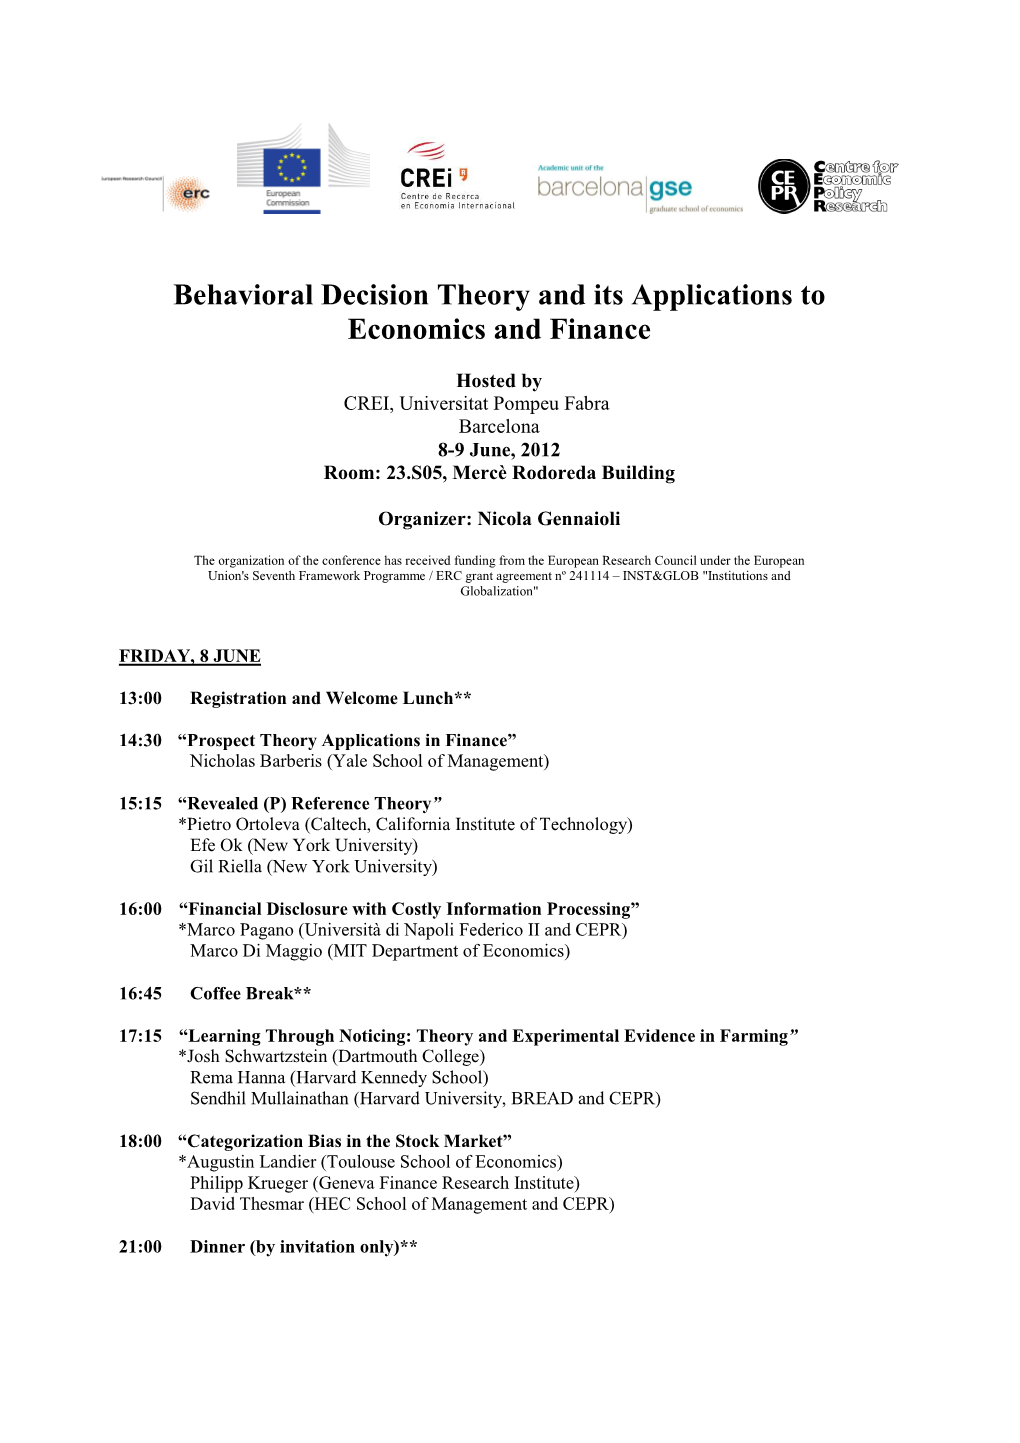 Behavioral Decision Theory and Its Applications to Economics and Finance